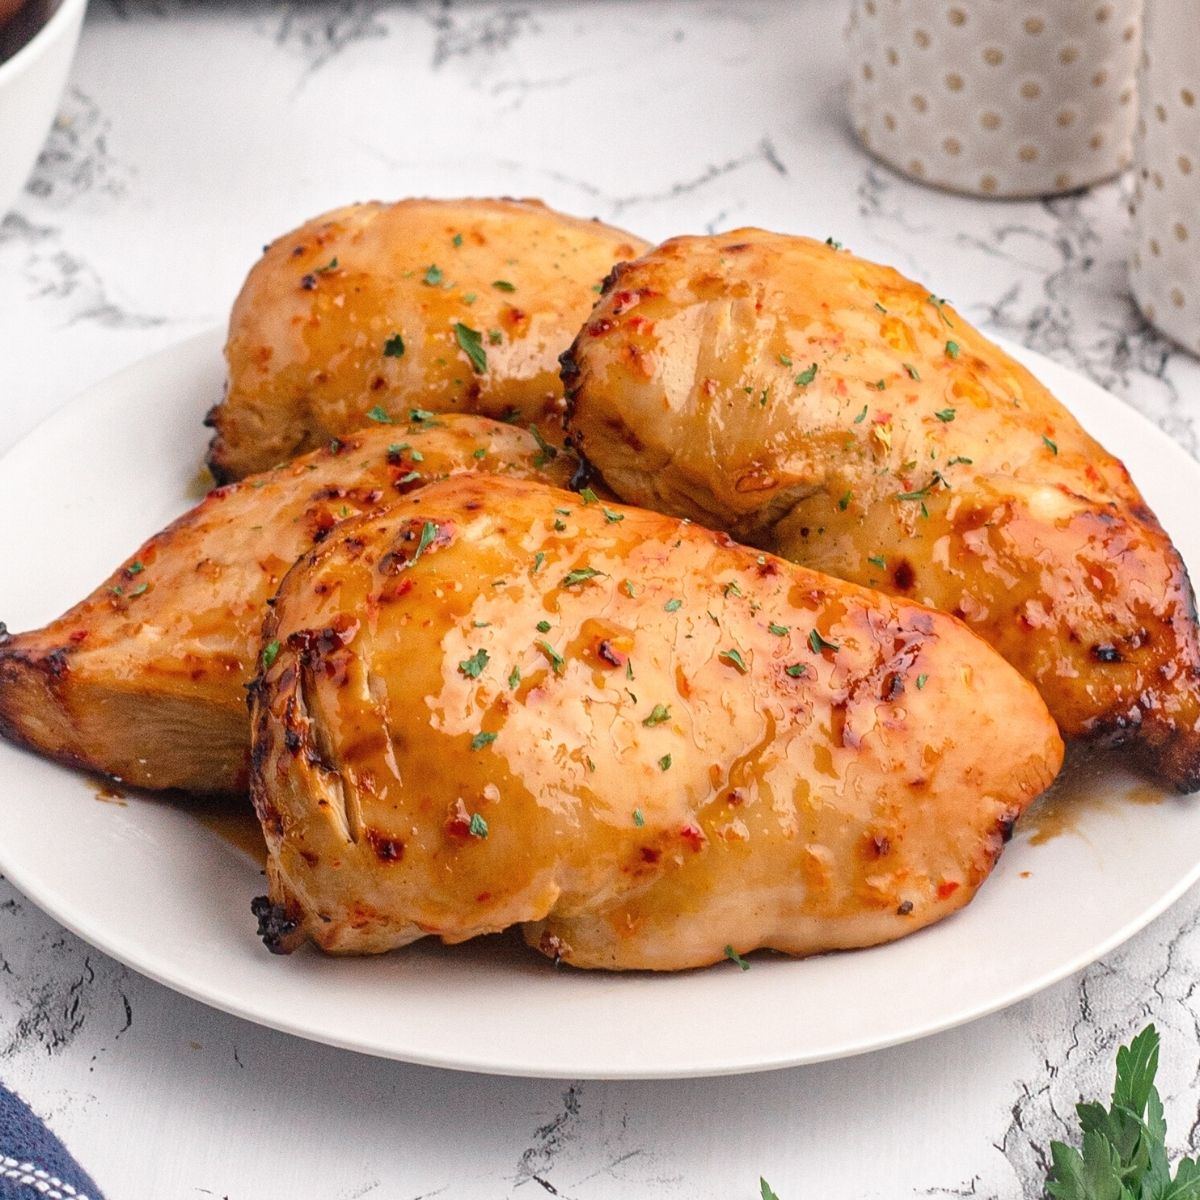 Golden chicken breasts cooked with a shiny glaze of peach preserves and seasonings.